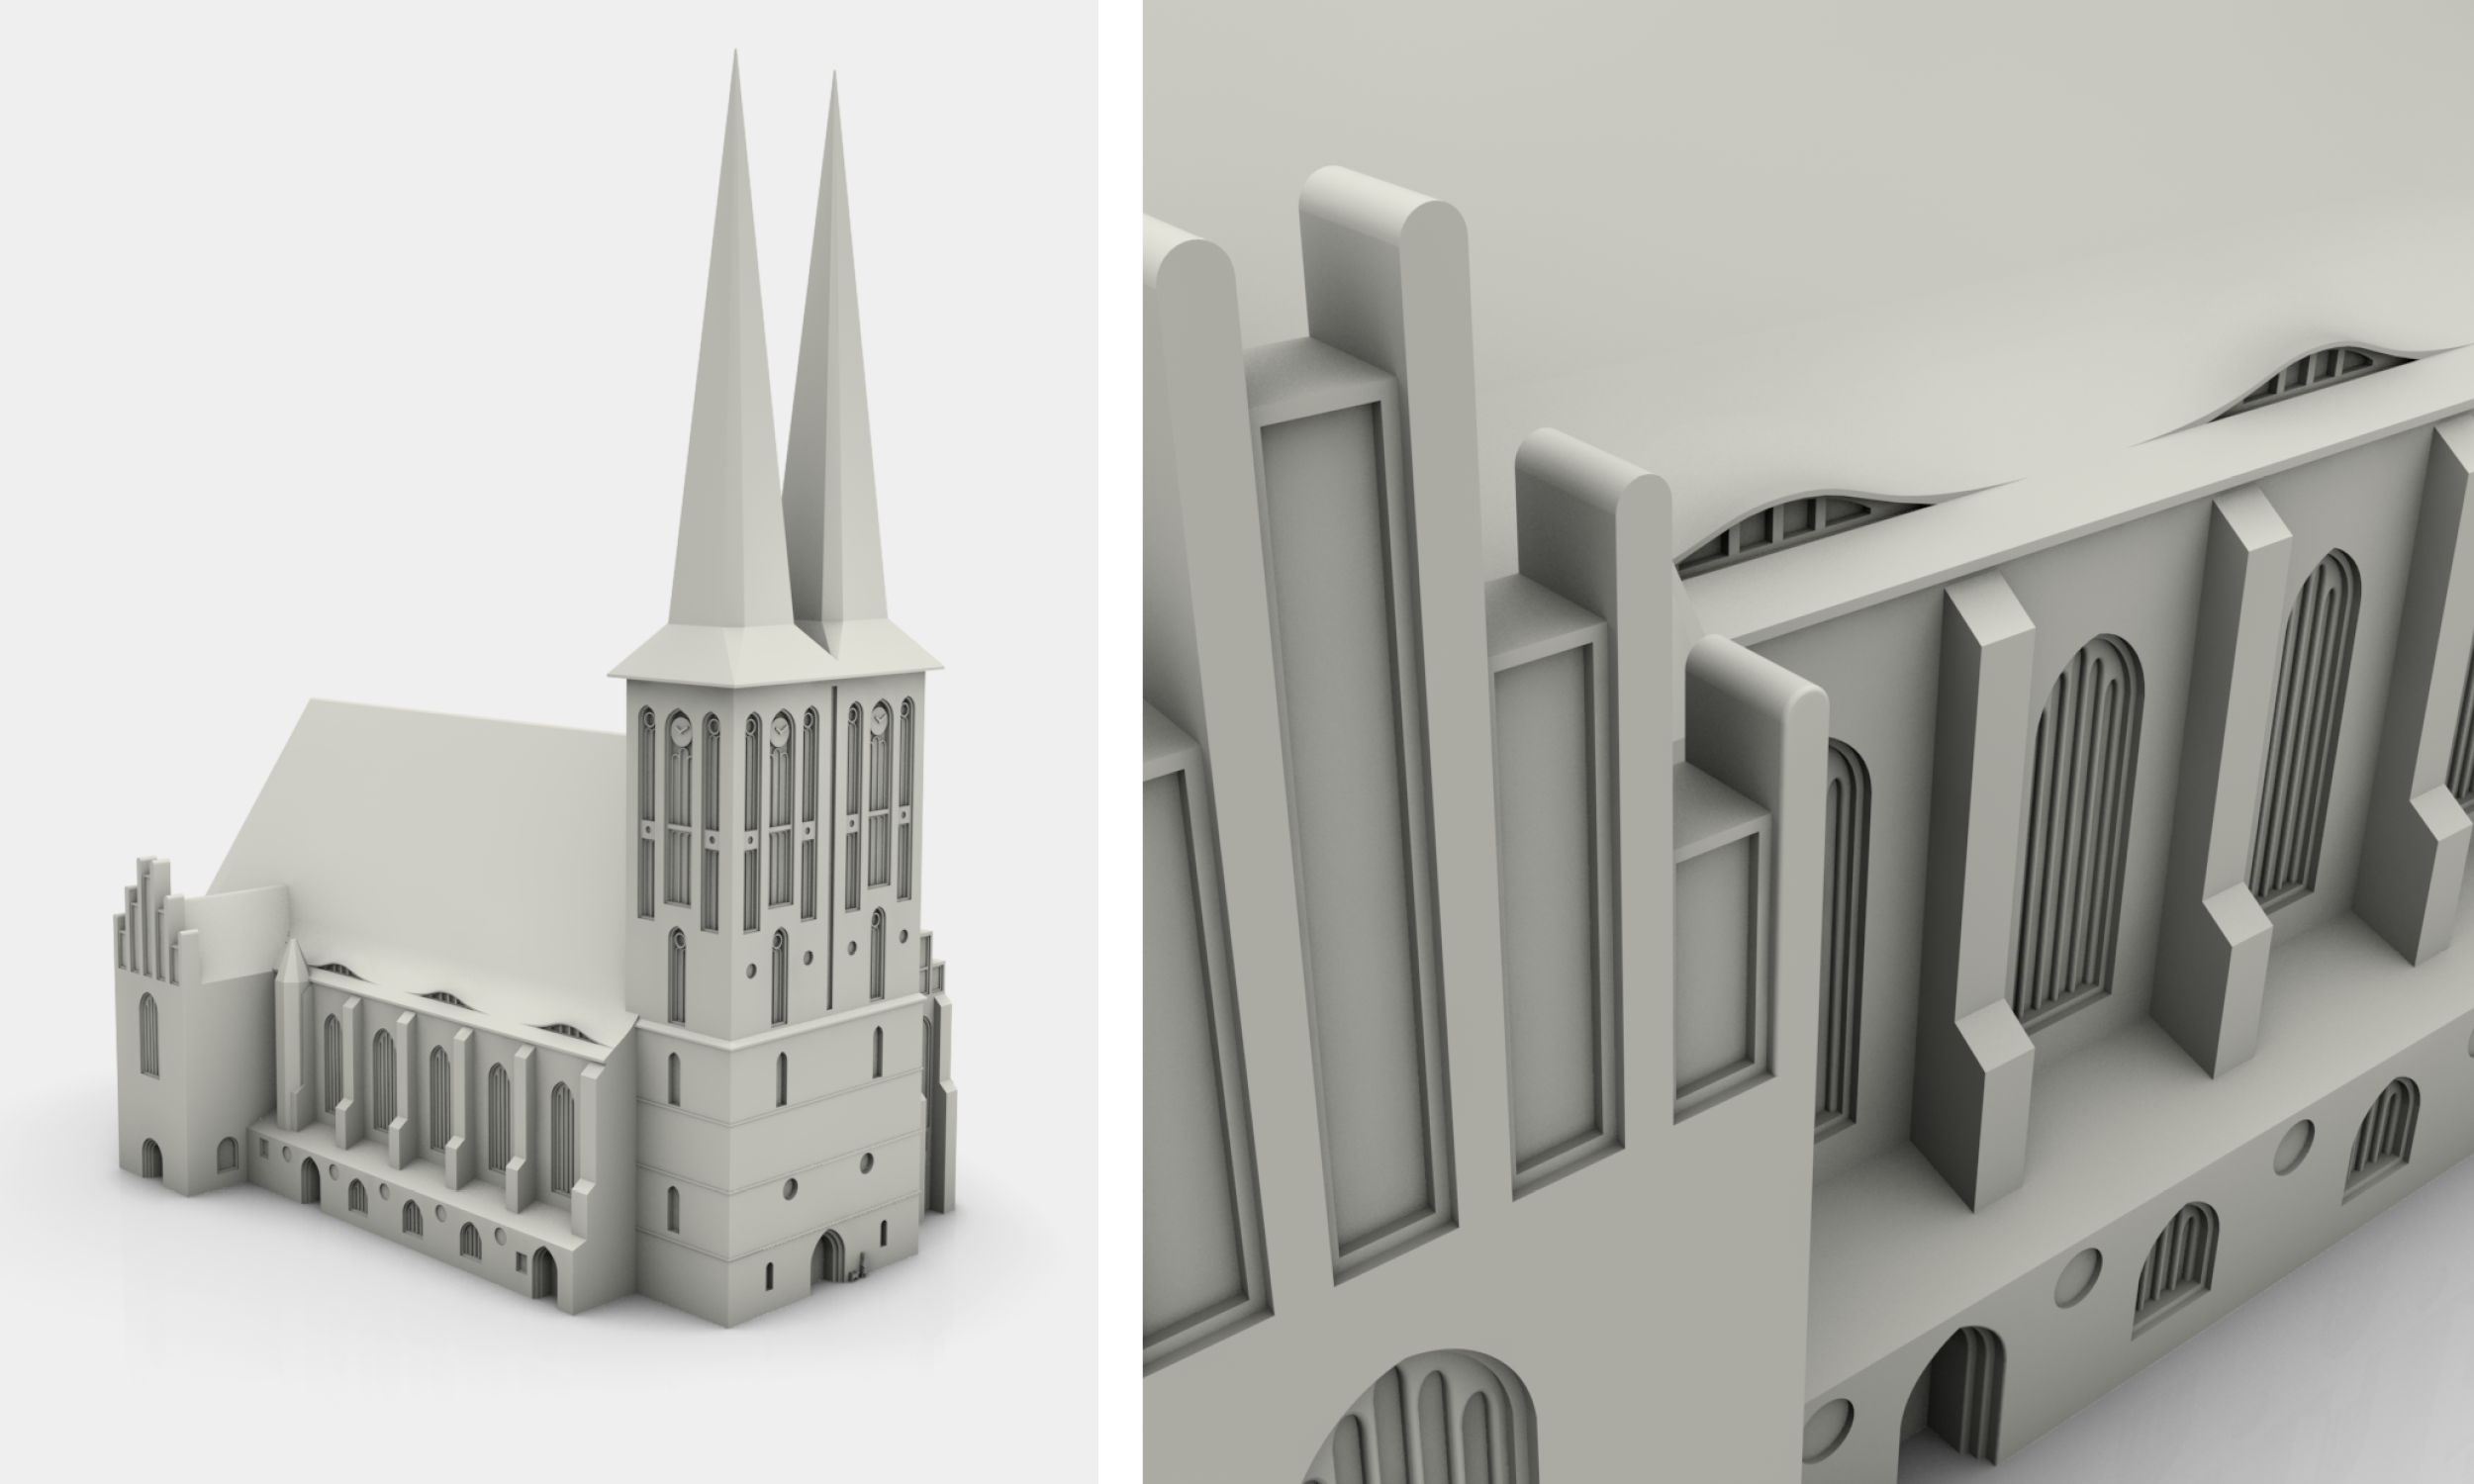 Left: Graphic of the complete tactile model of the Nikolaikirche. Right: Graphic with the view of the north side of the Nikolaikirche.